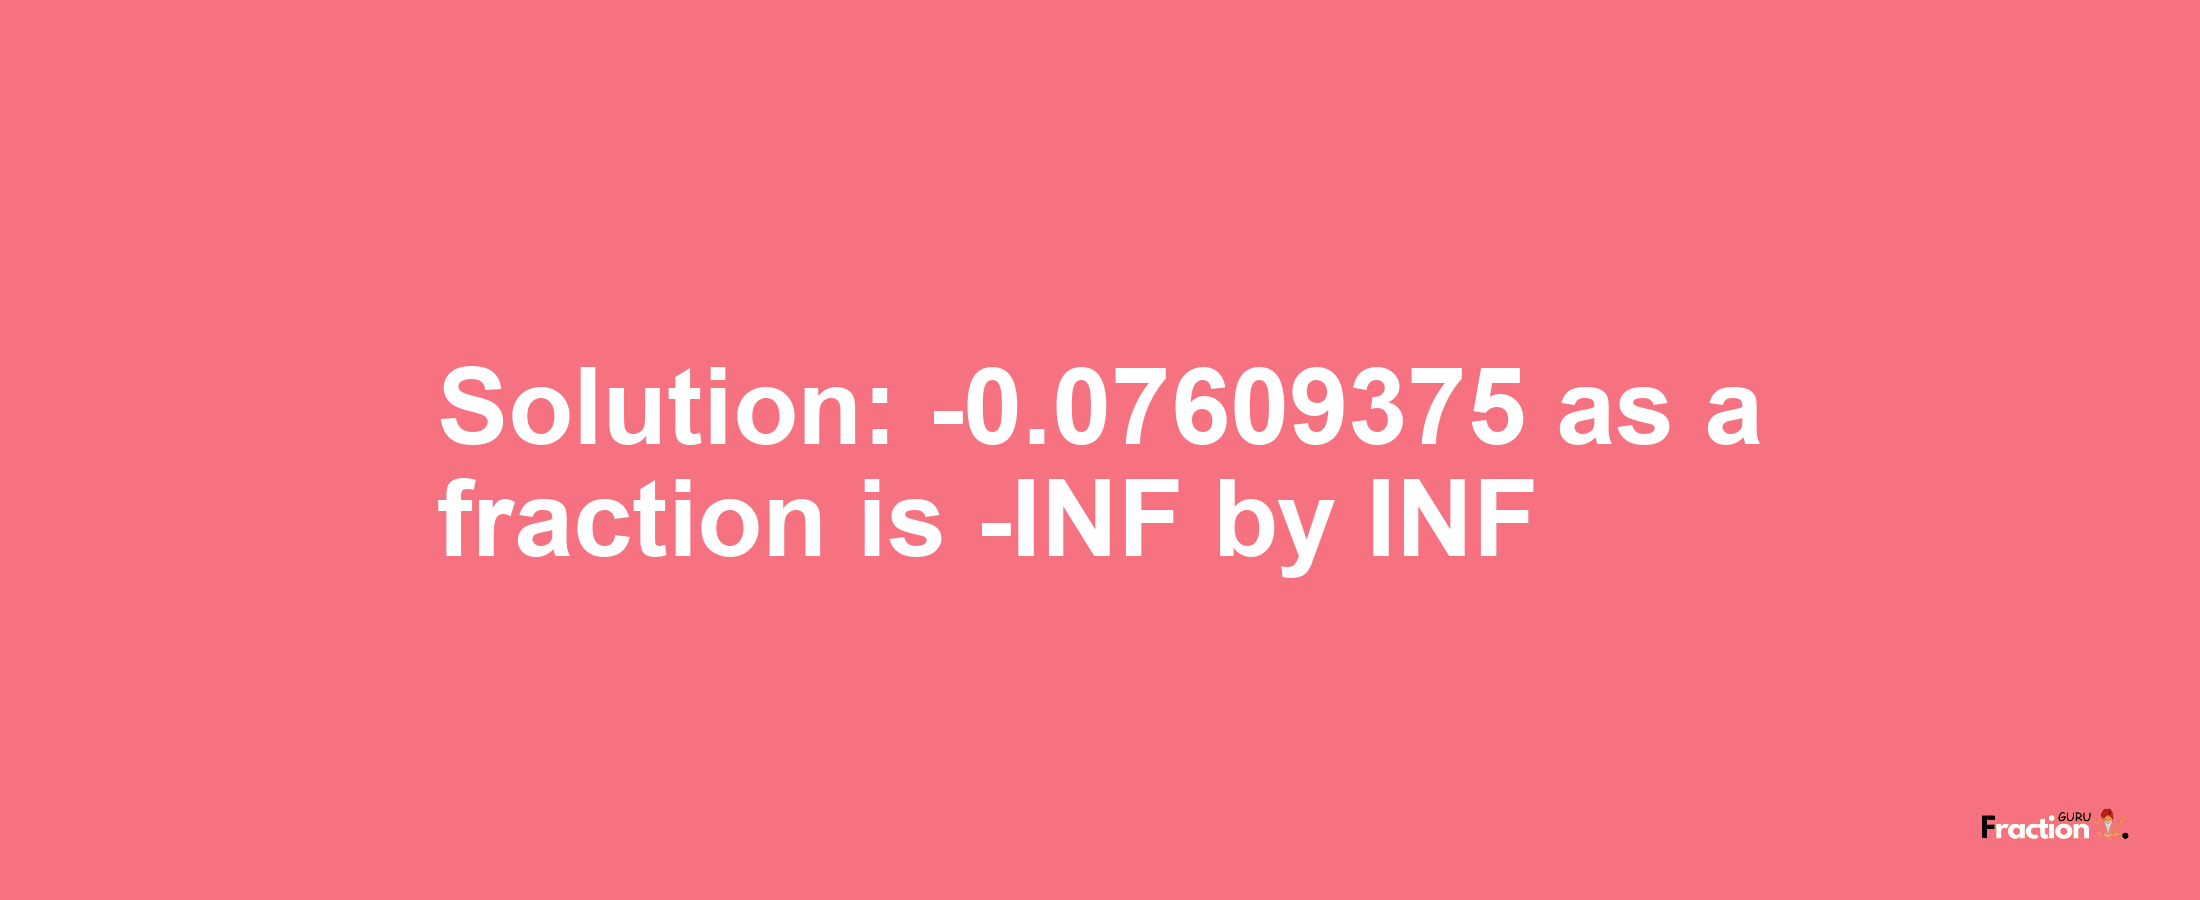 Solution:-0.07609375 as a fraction is -INF/INF